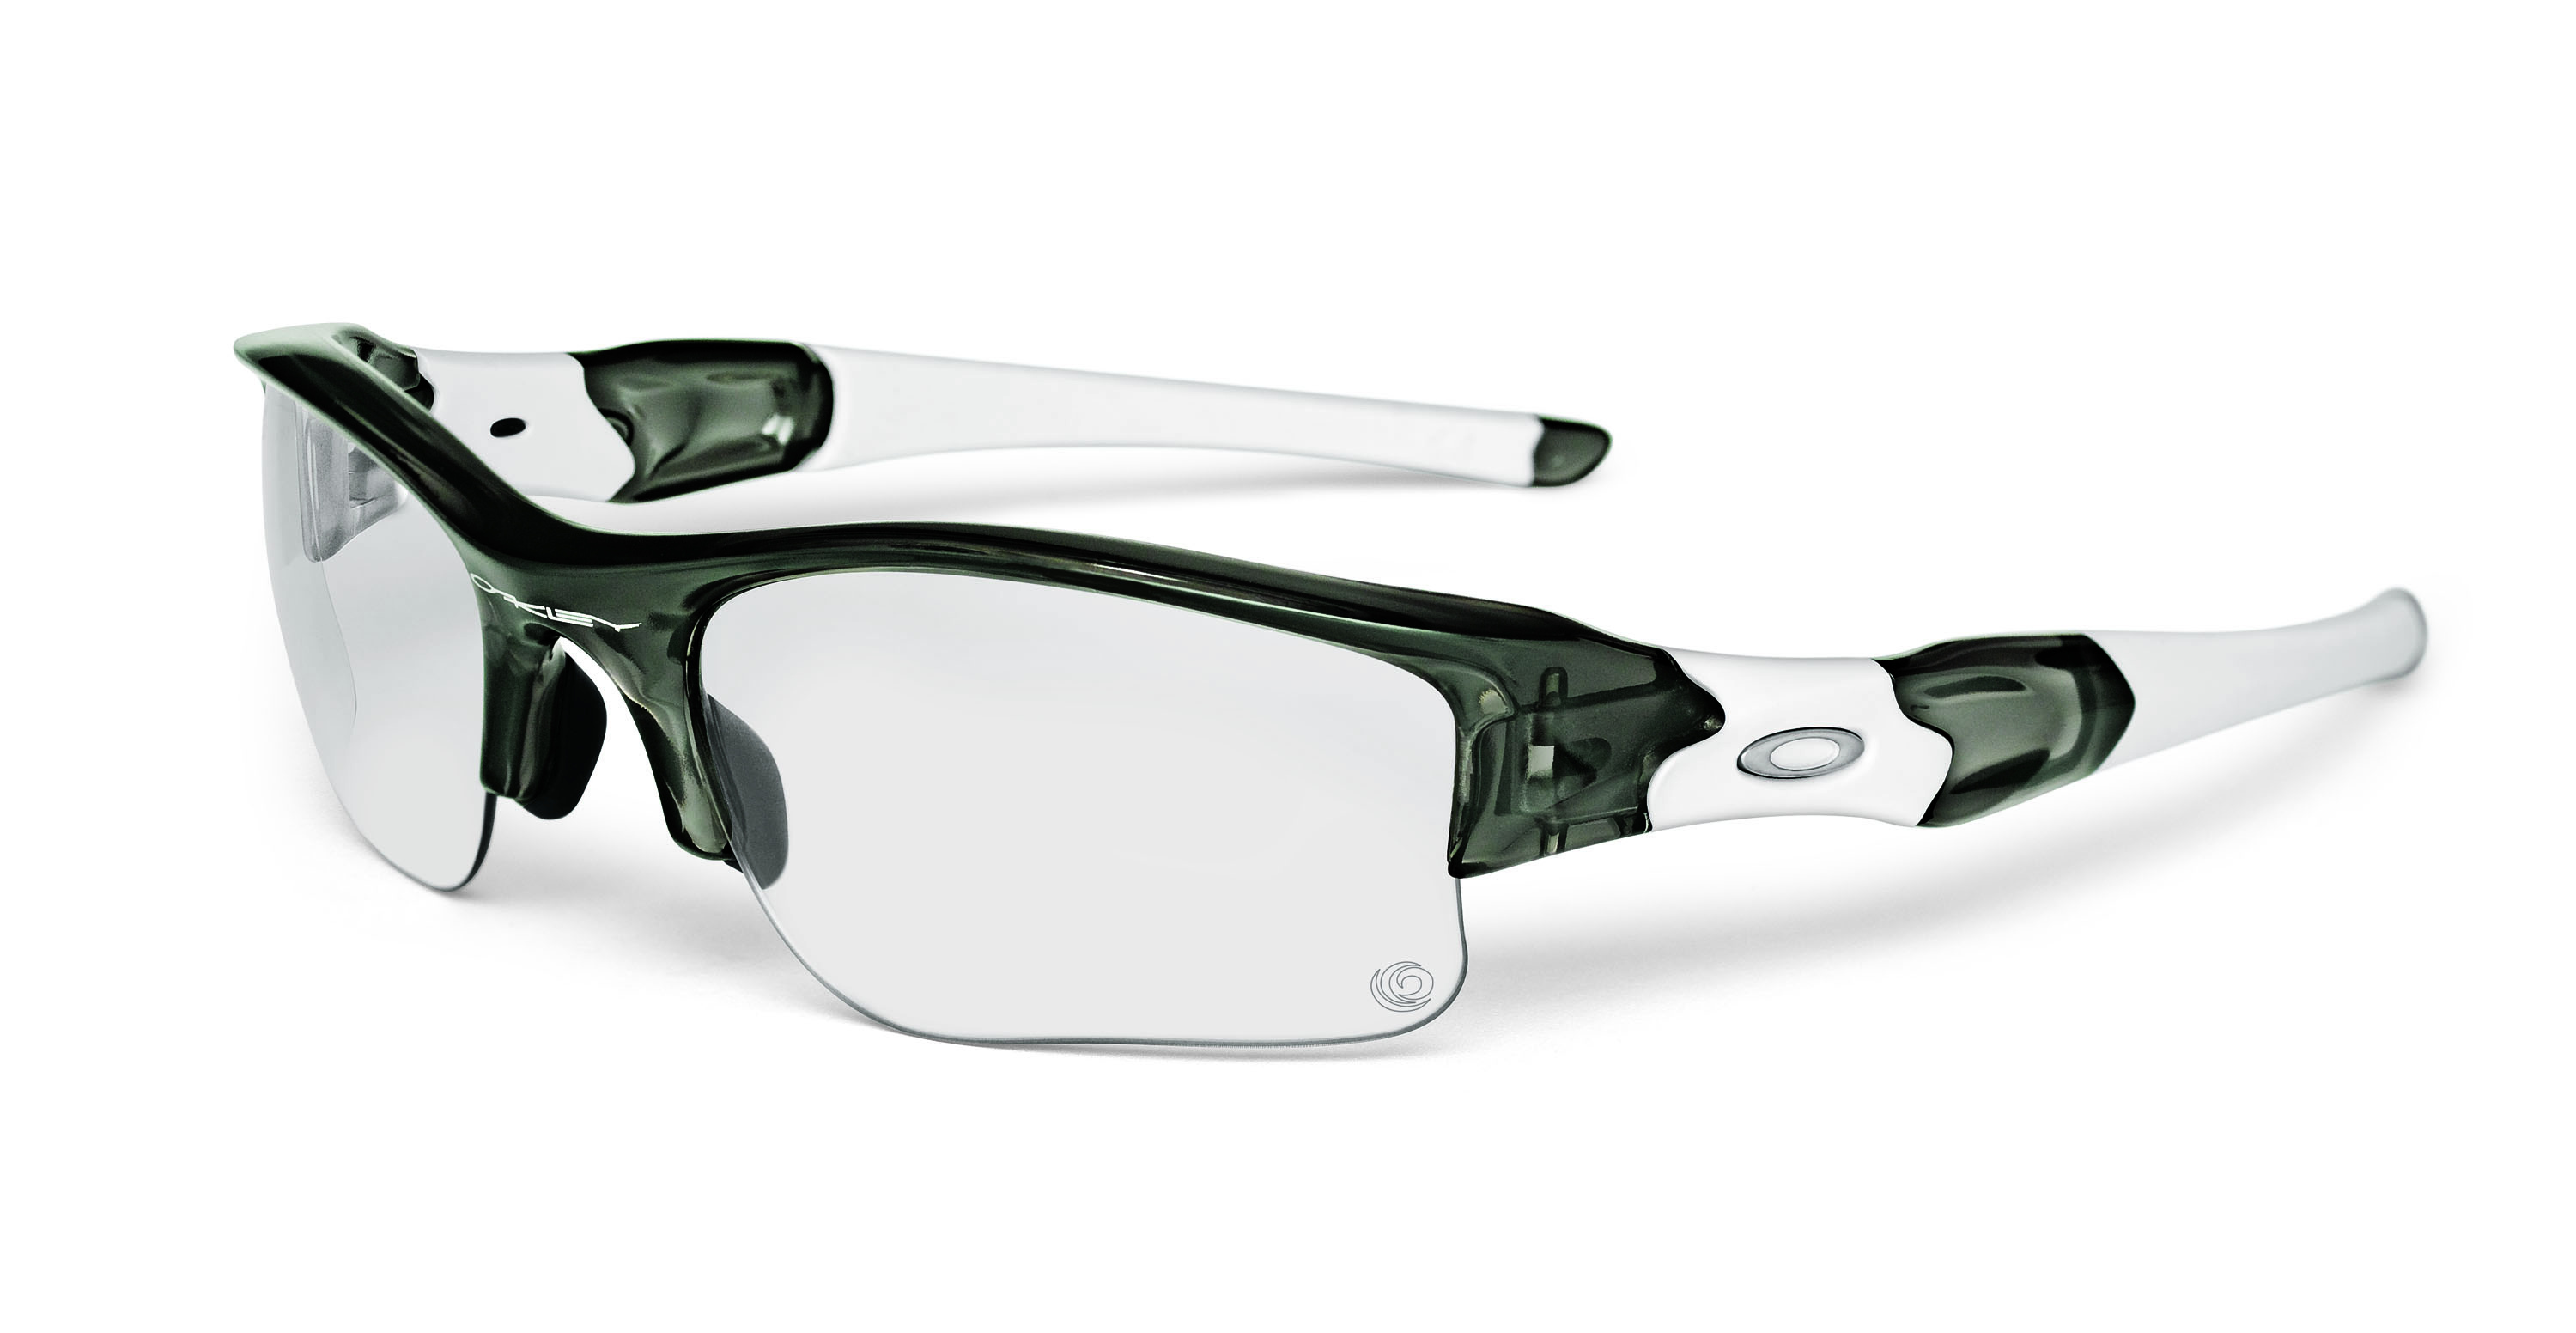 What are transition lenses?